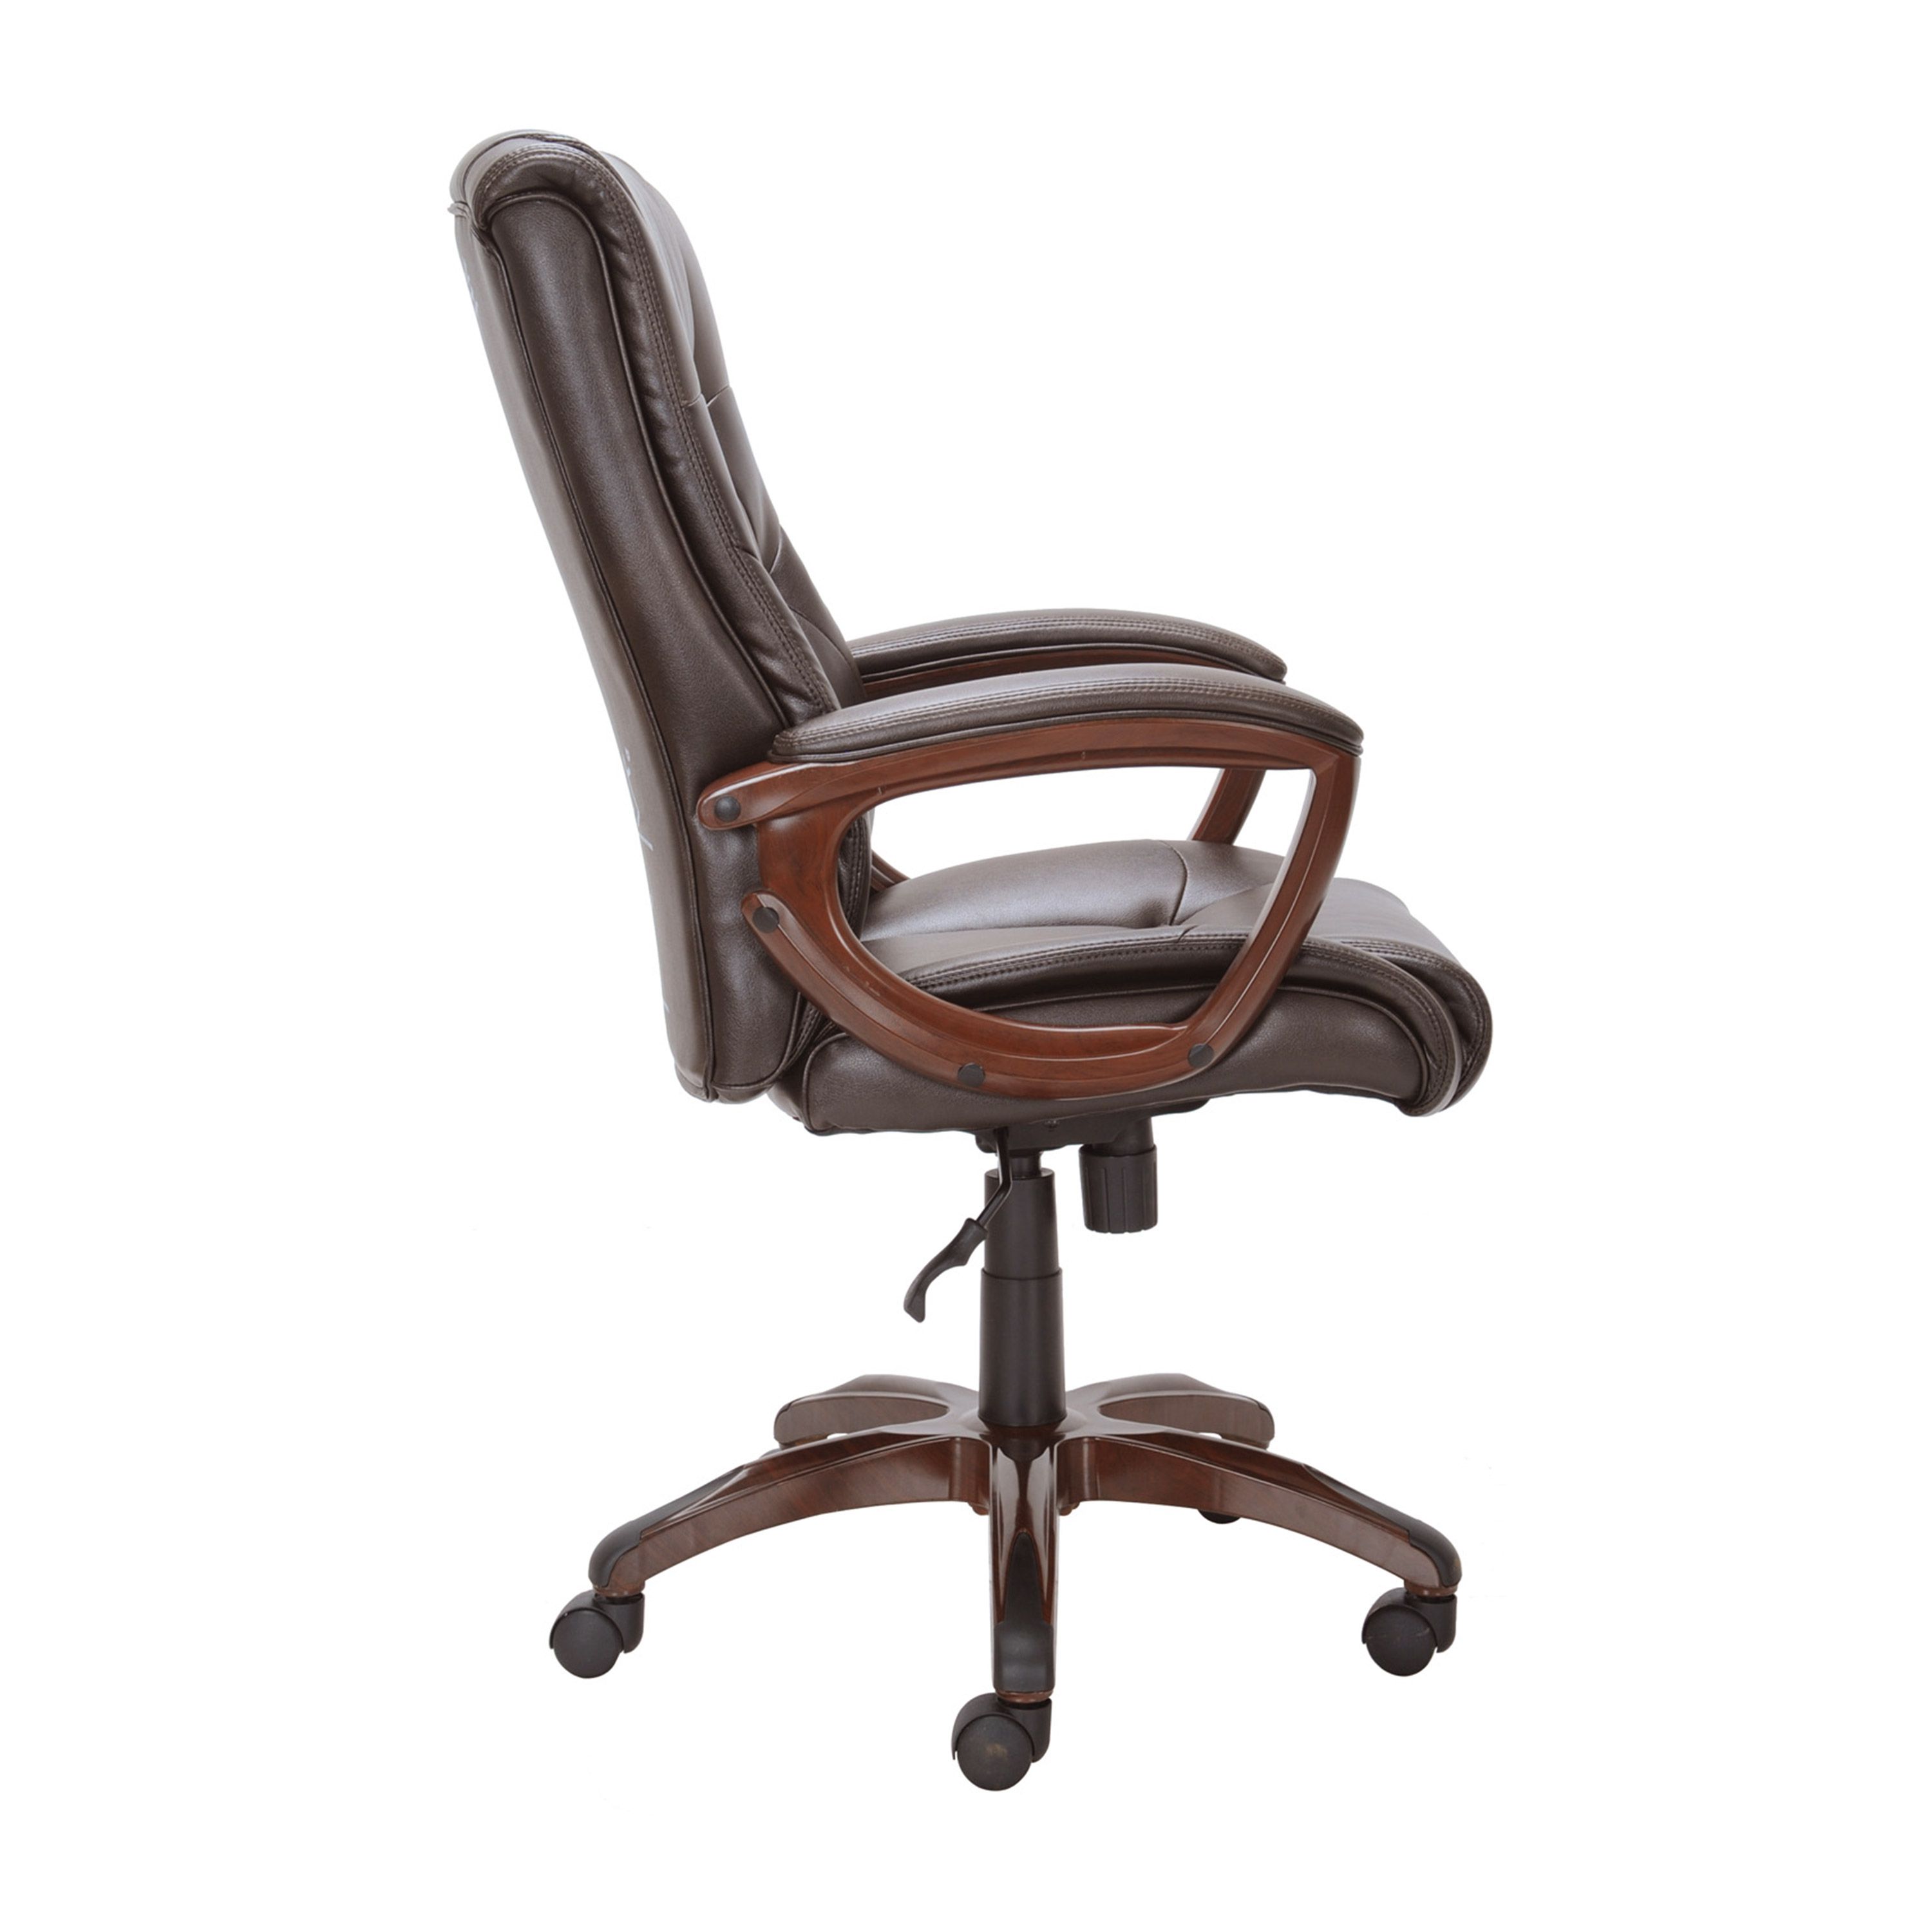 NEW Executive Office Chair Bonded Leather Desk Seat Luxurious Computer Elegant Rolling Laptop Working Seating Work Station Soft Brown *↓READ↓*